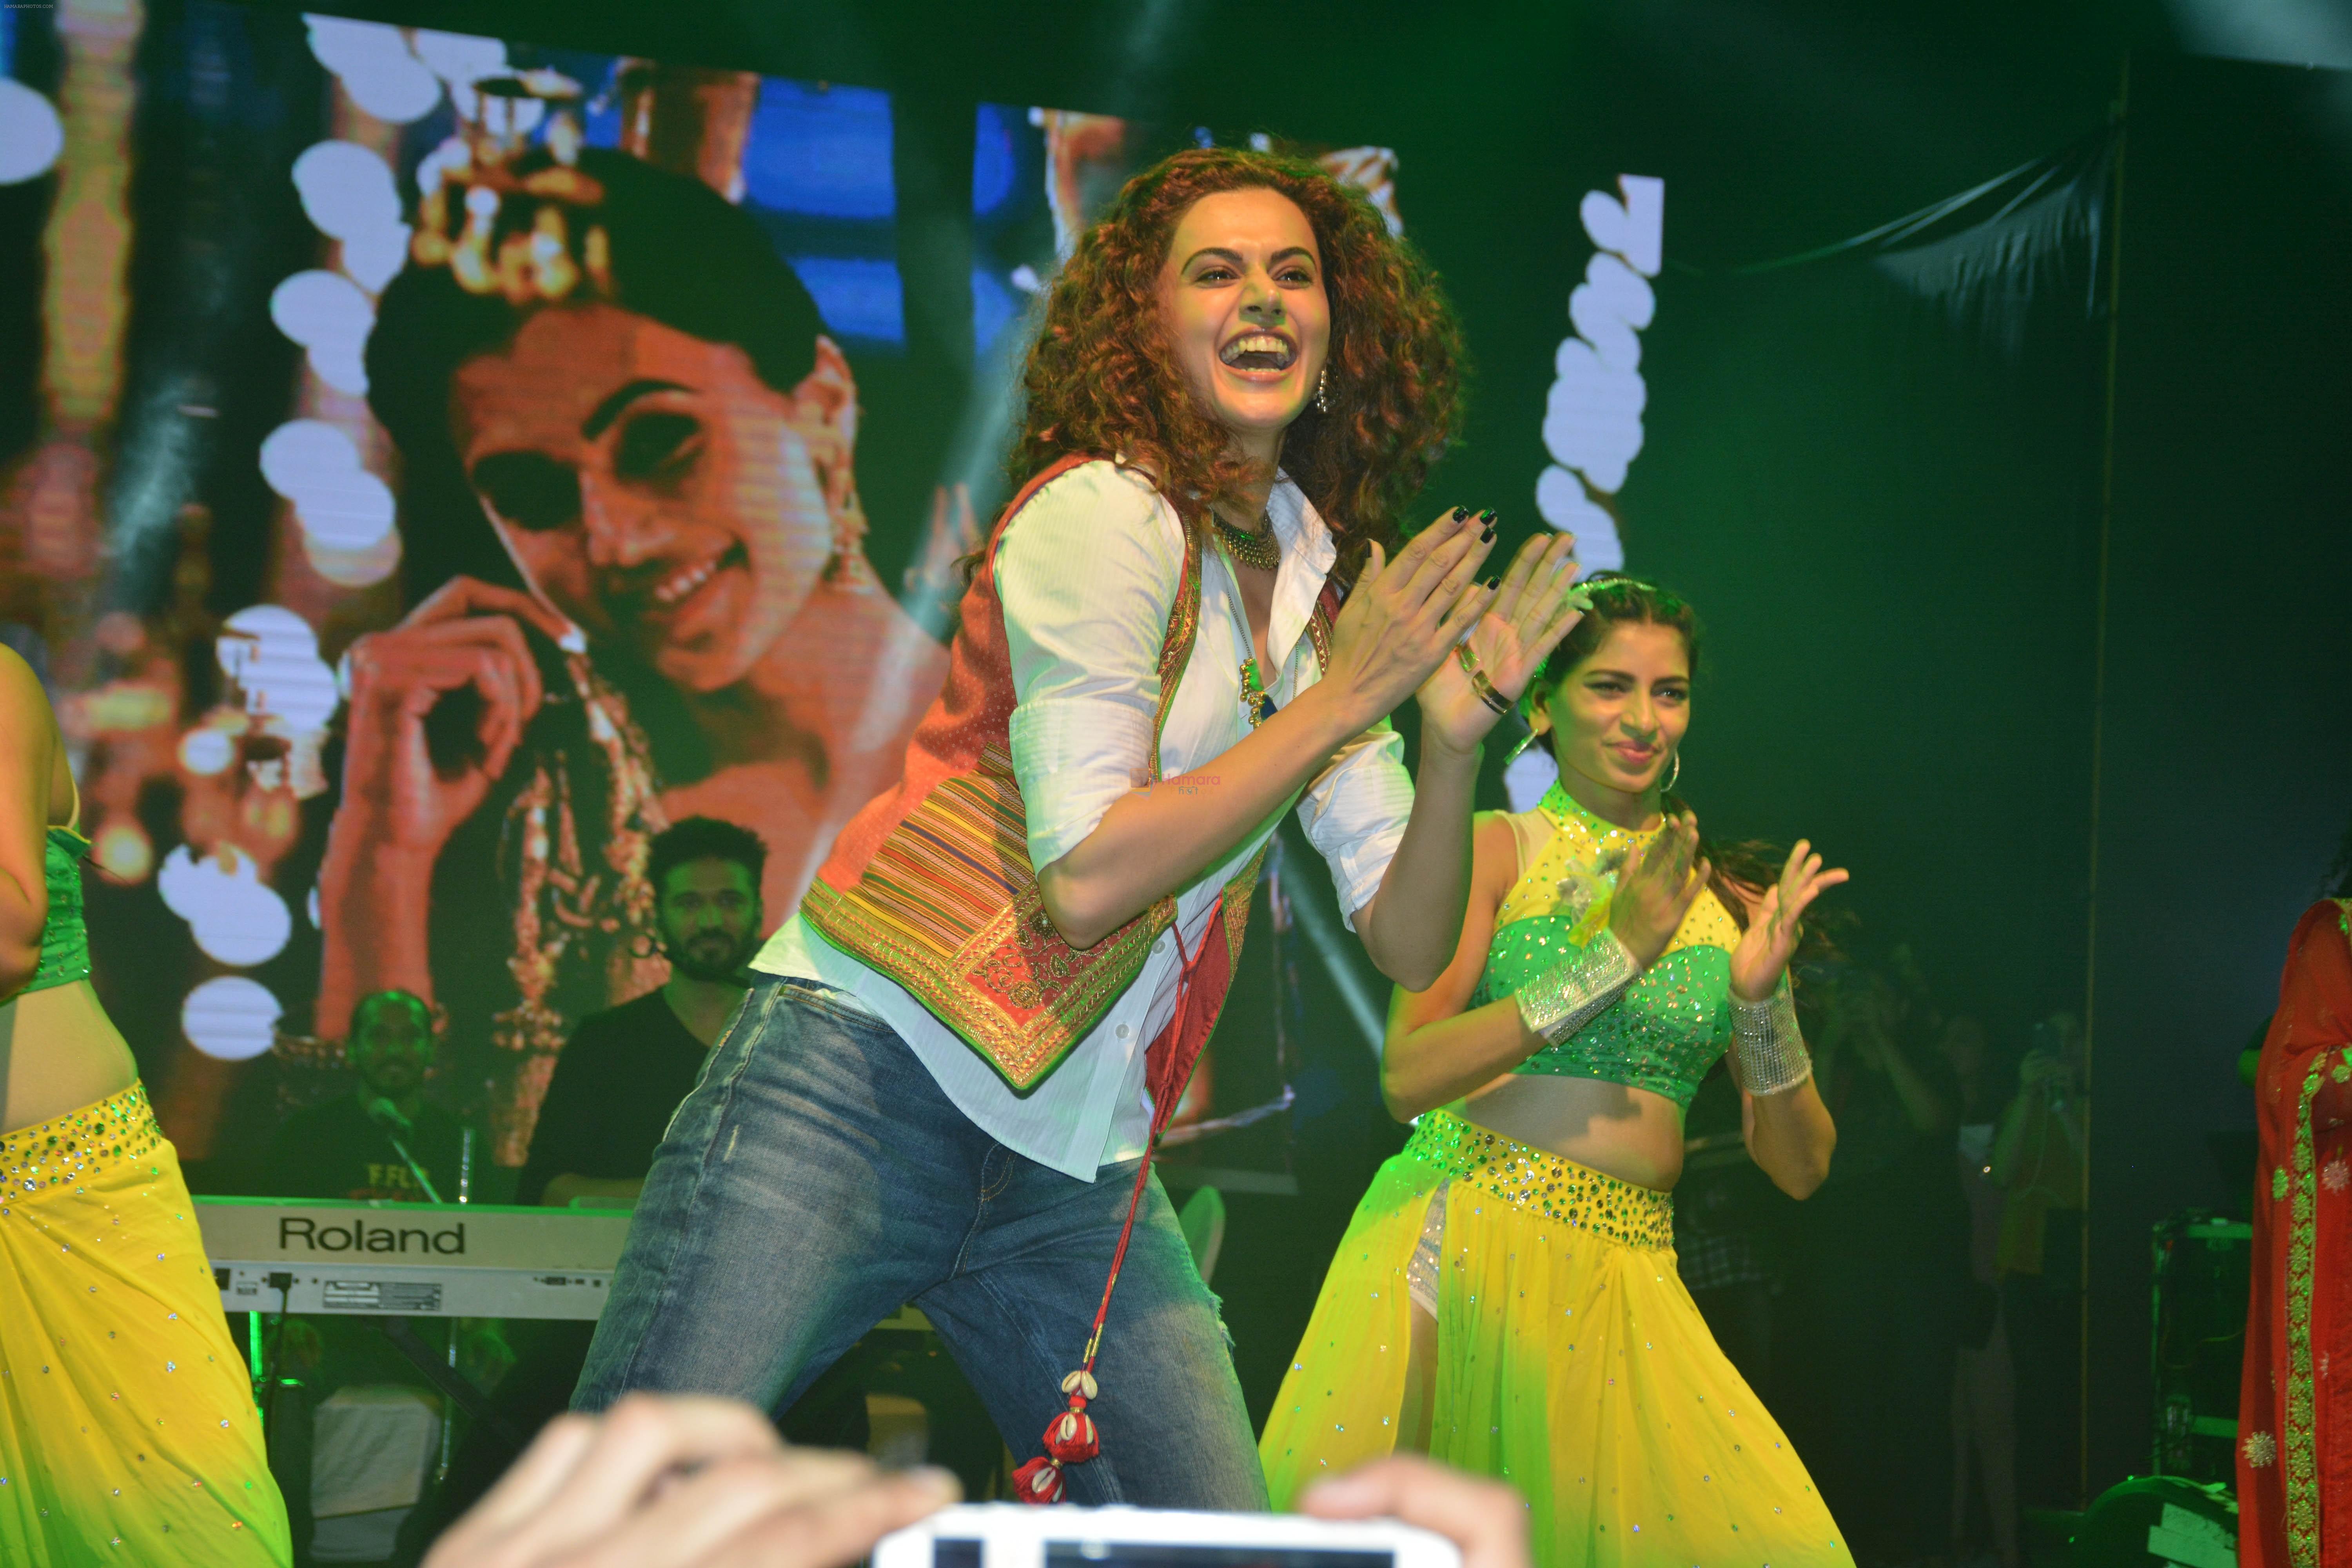 Taapsee Pannu at Manmarziyaan Music Concert in NM College In Juhu on 19th Aug 2018